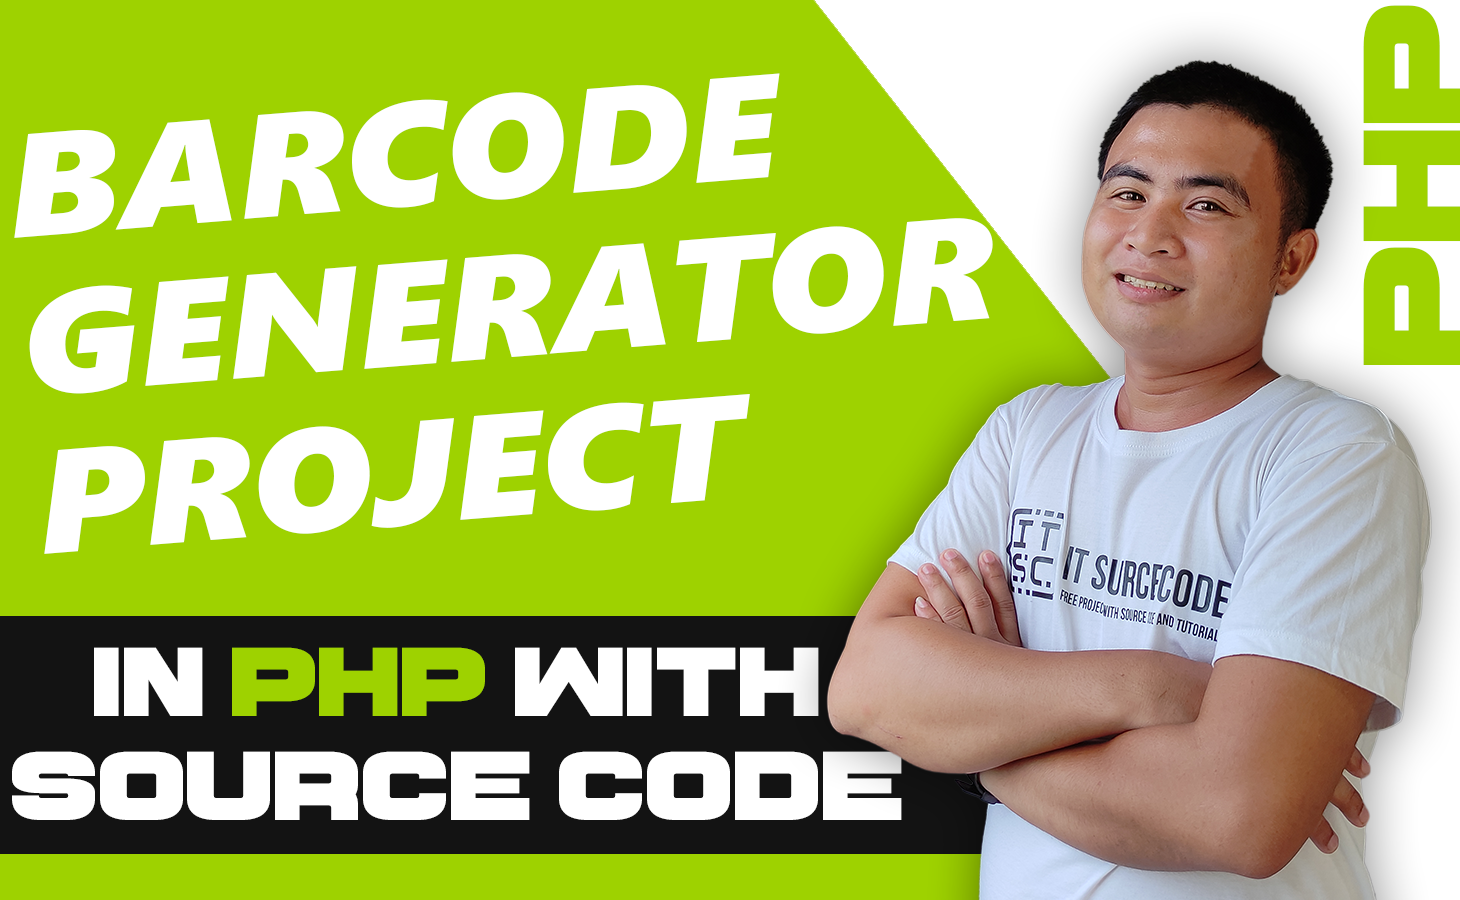 barcode generation project in java with source code